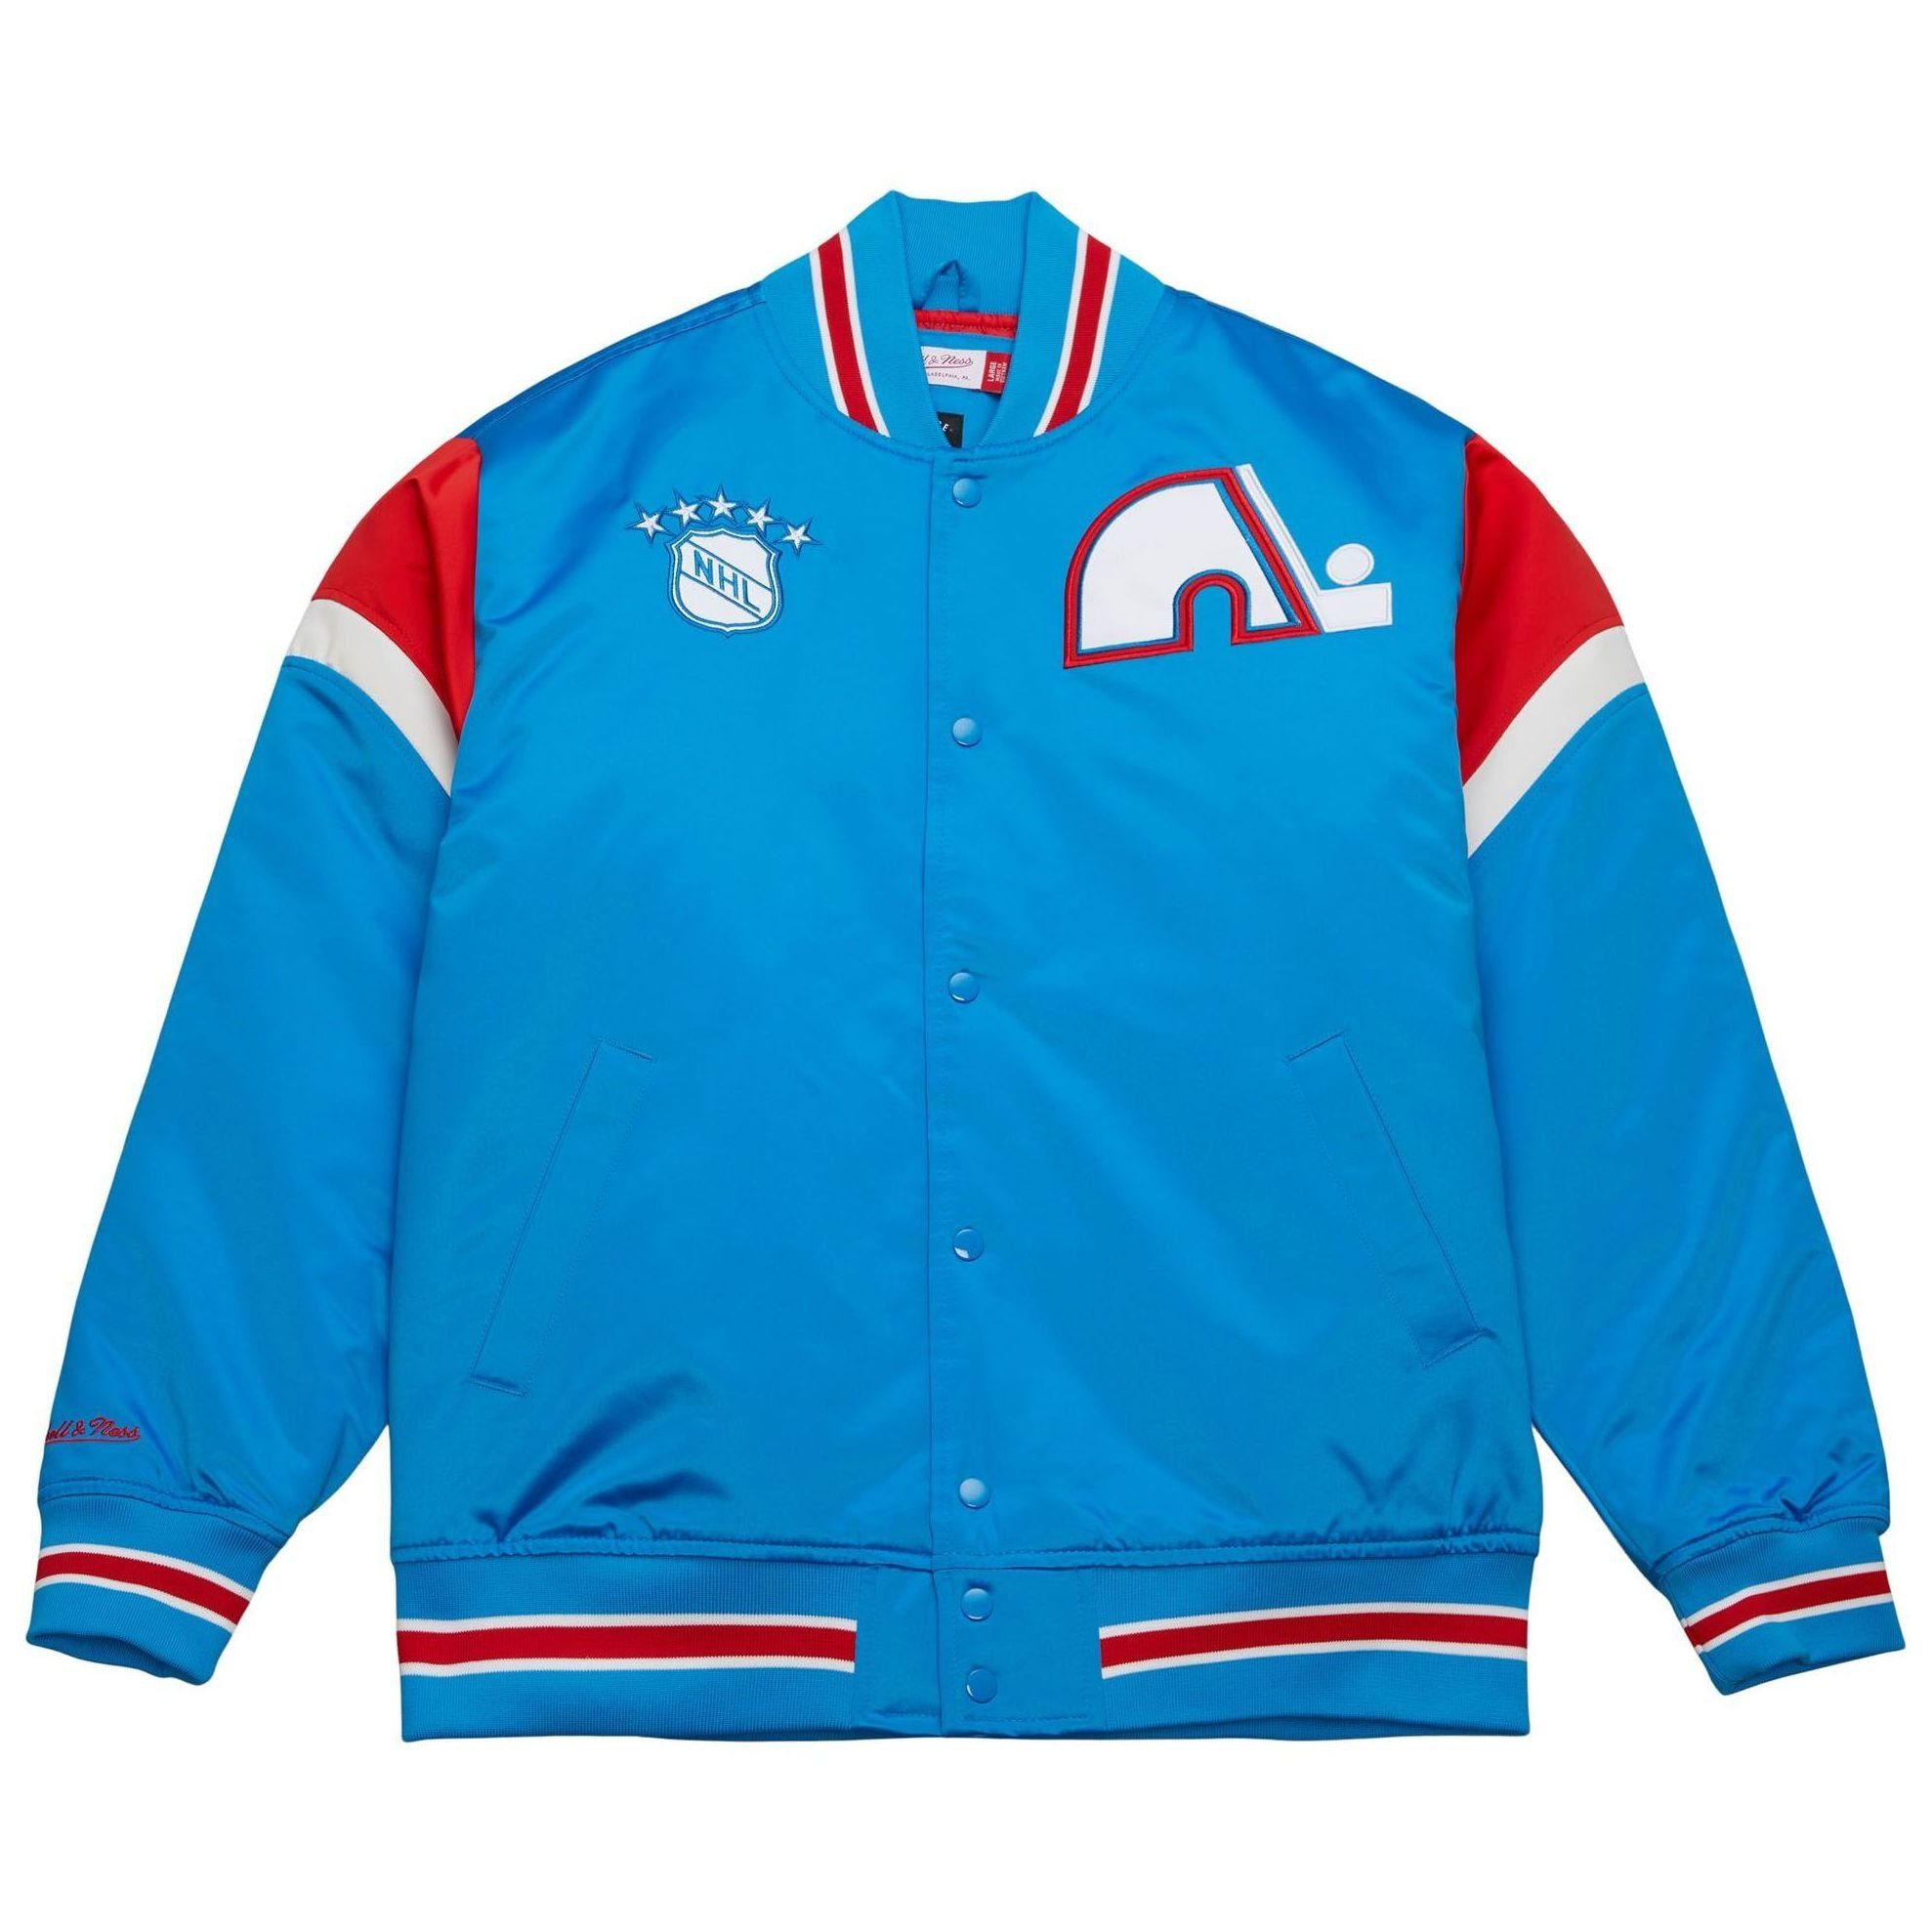 Mitchell & Ness Heavyweight NHL Collegejacke Satin Quebec Nordiques